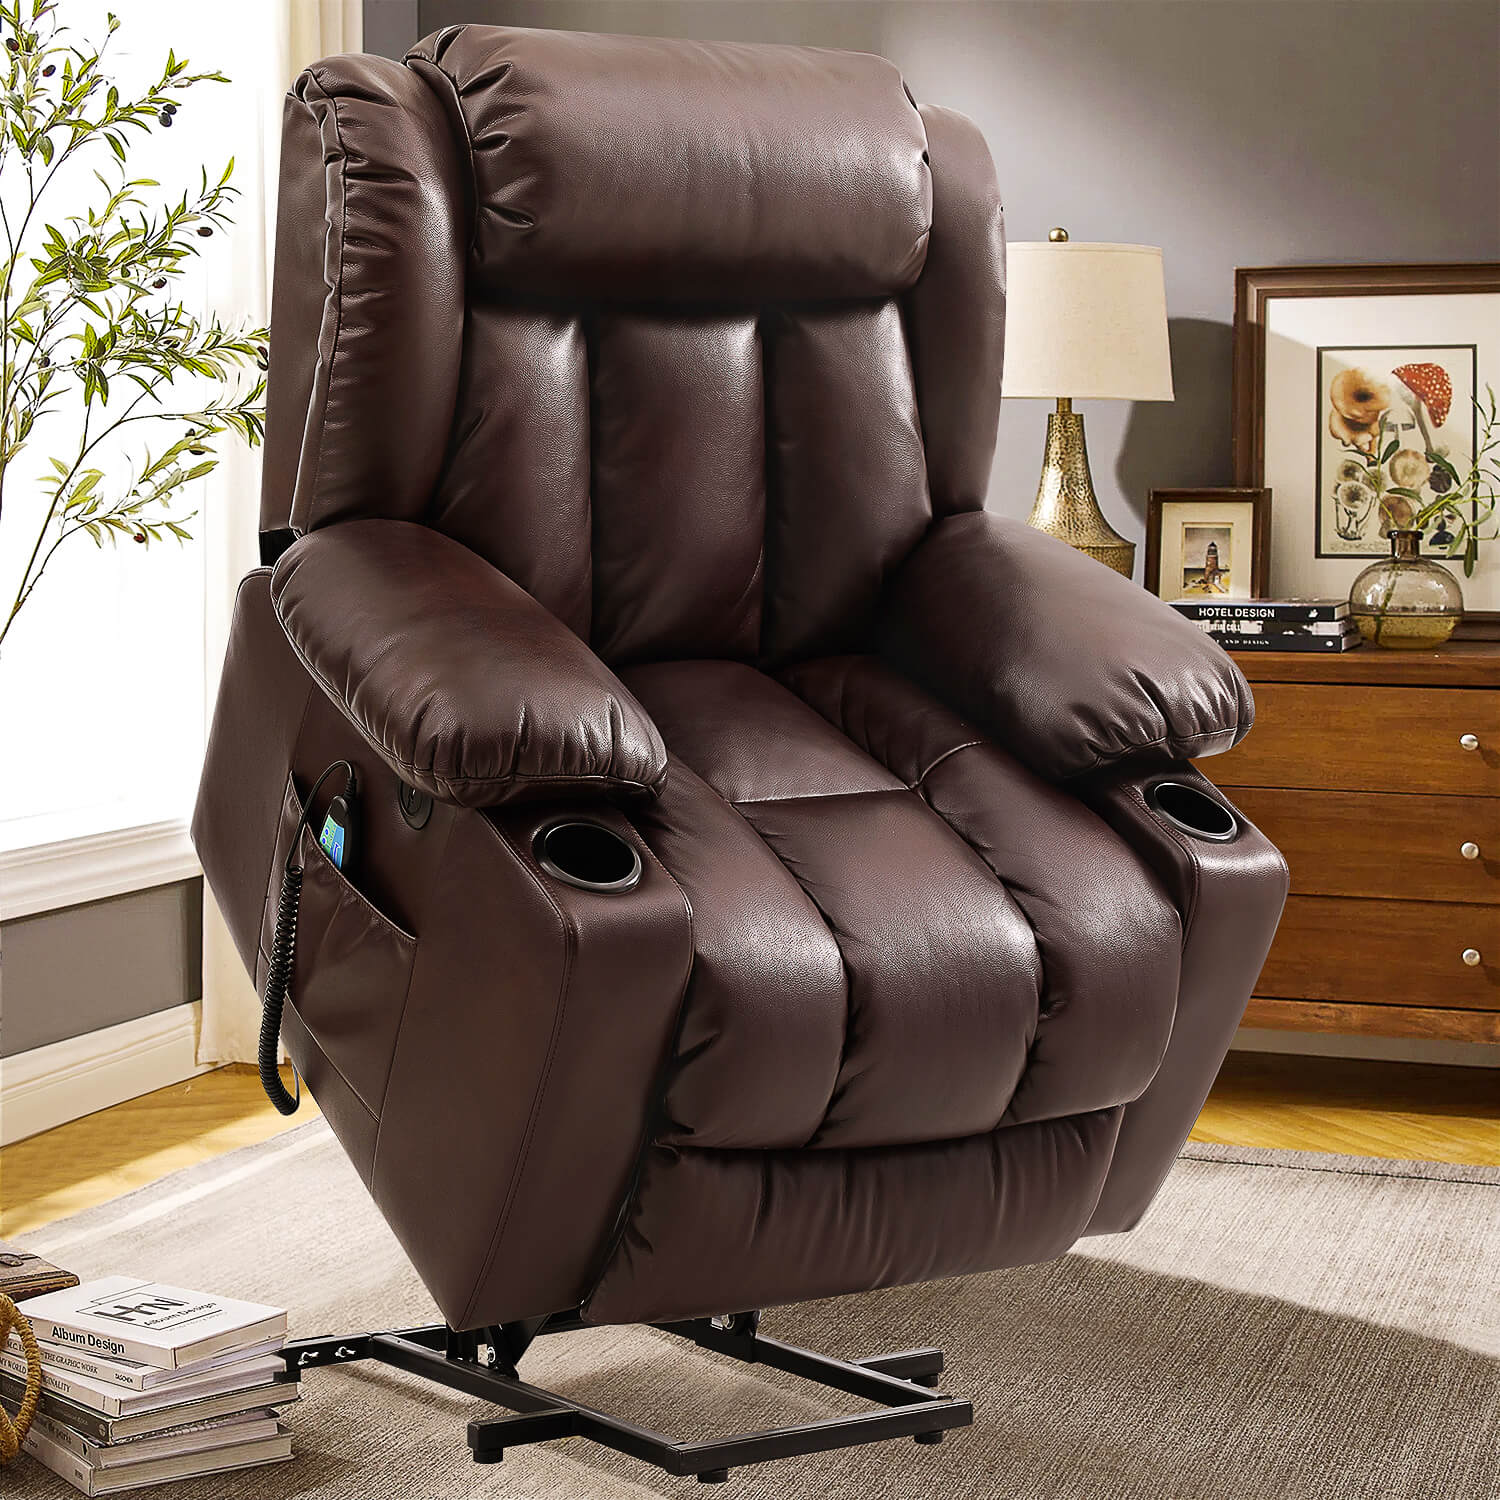 soulout brown lift chair in the raised position